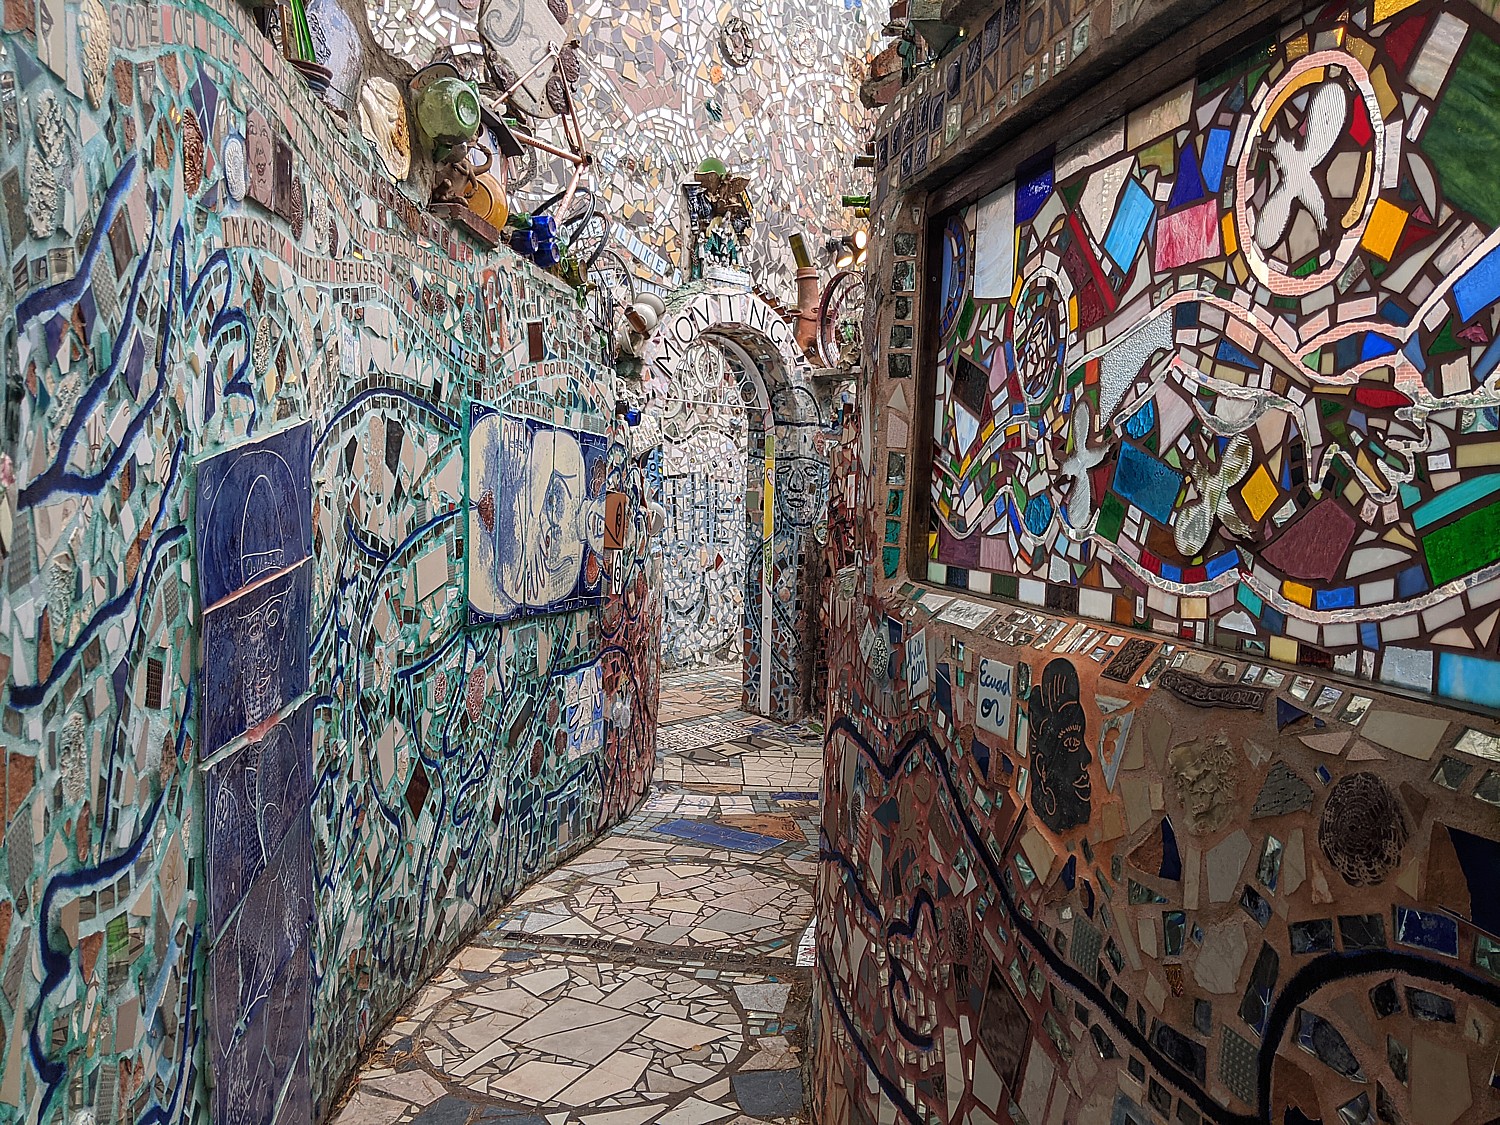 Going Places Philadelphia Offers Treasure Trove Of History Heritage Culture Magic Gardens Franklin Institute Blog The Island Now